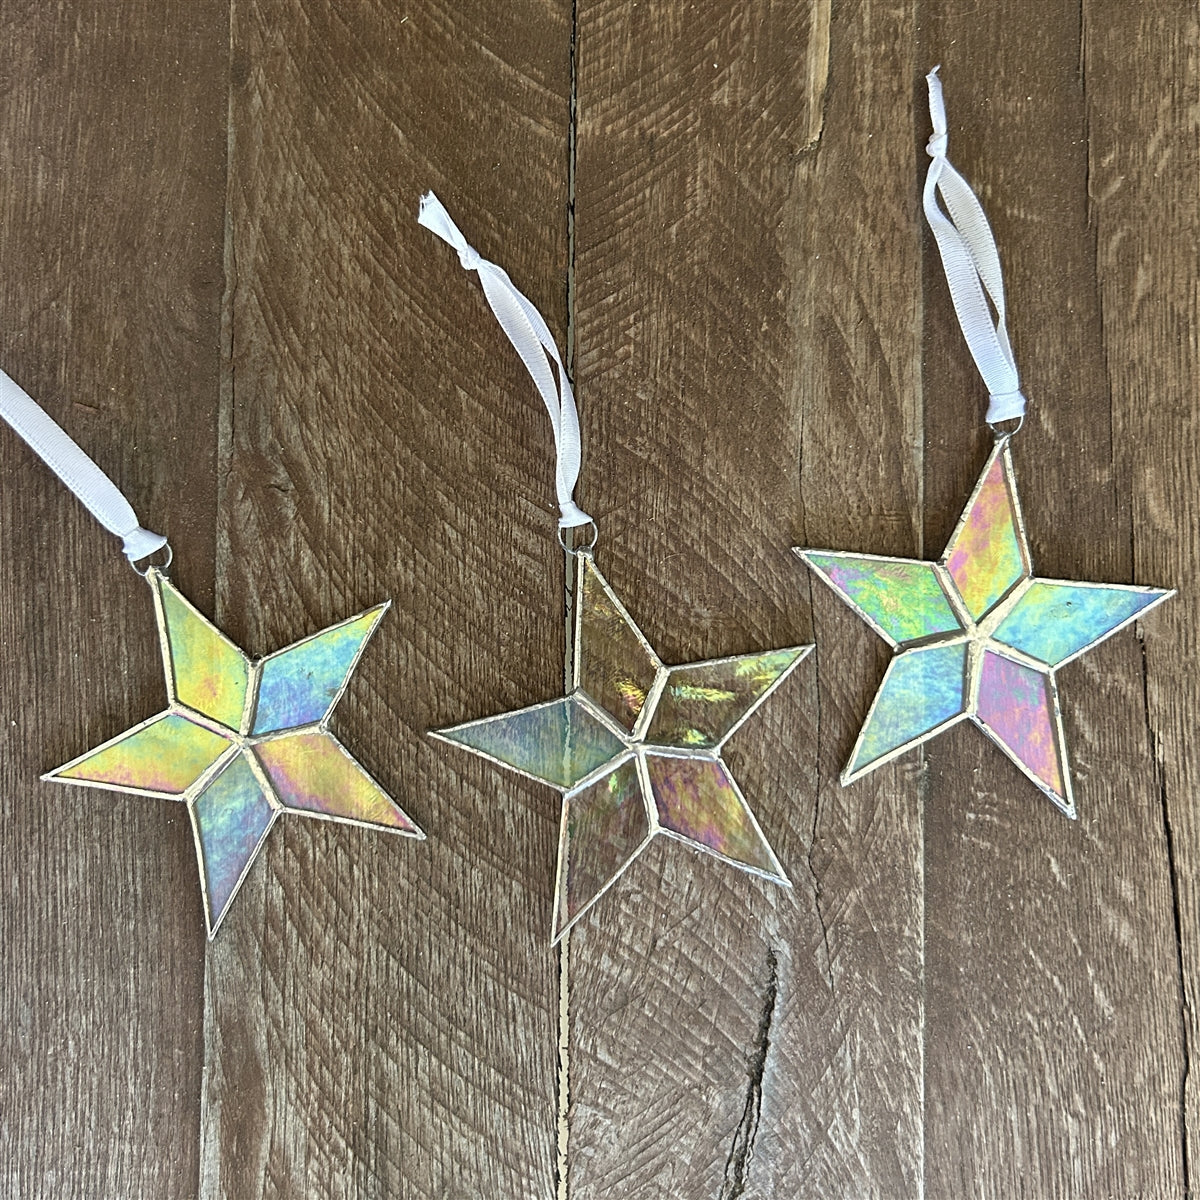 Assorted iridescent stars showing how light hits each one uniquely.